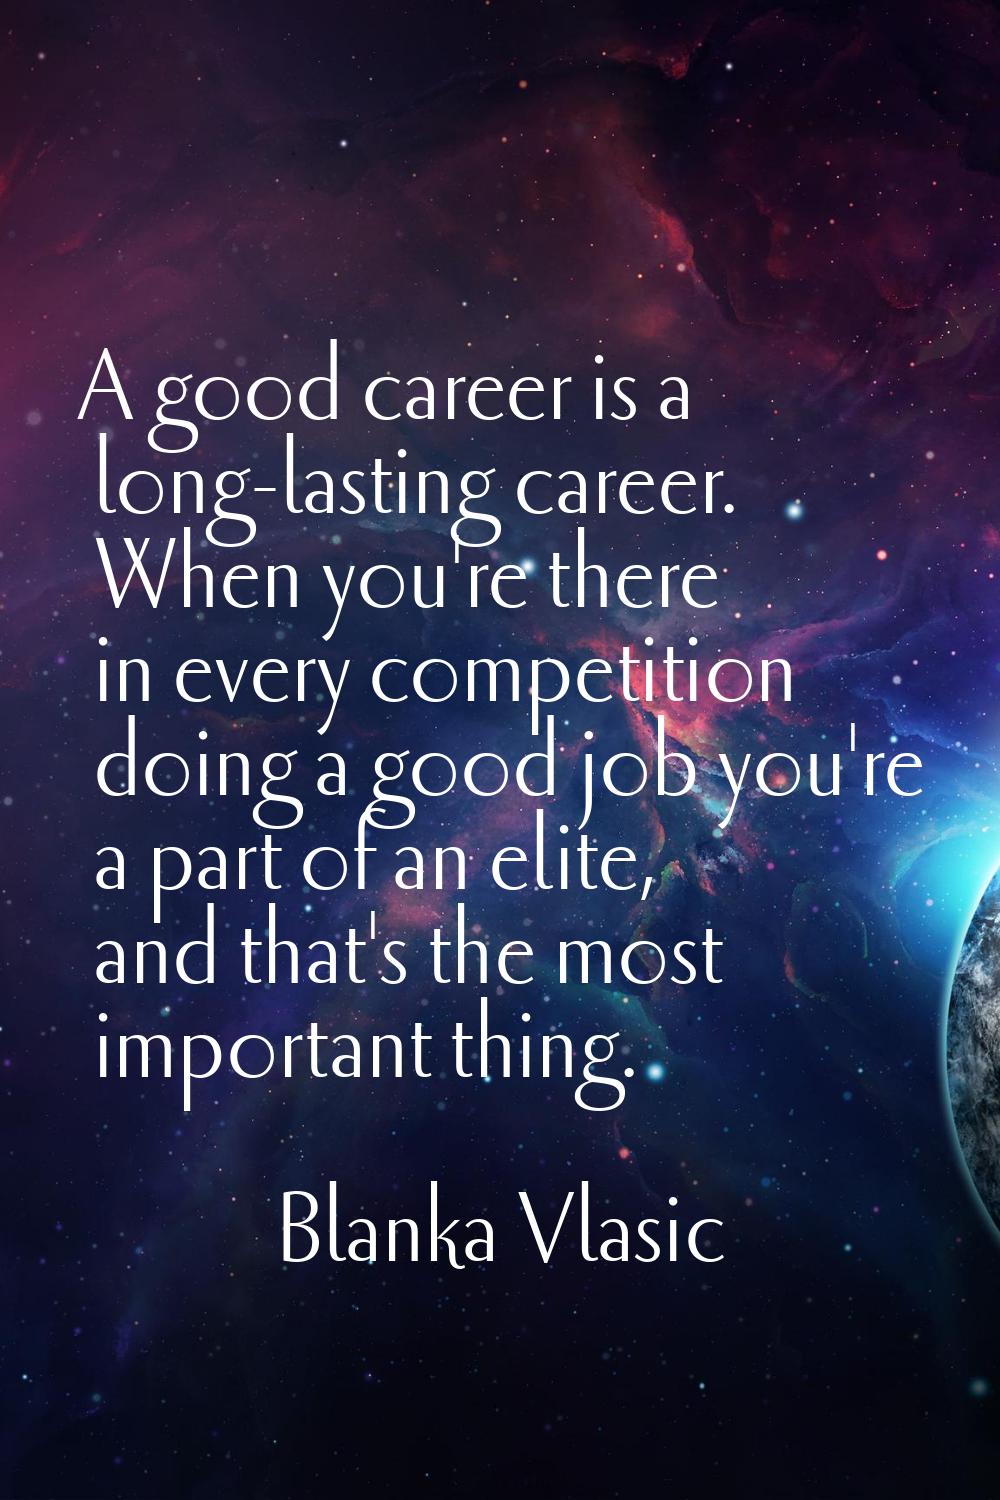 A good career is a long-lasting career. When you're there in every competition doing a good job you